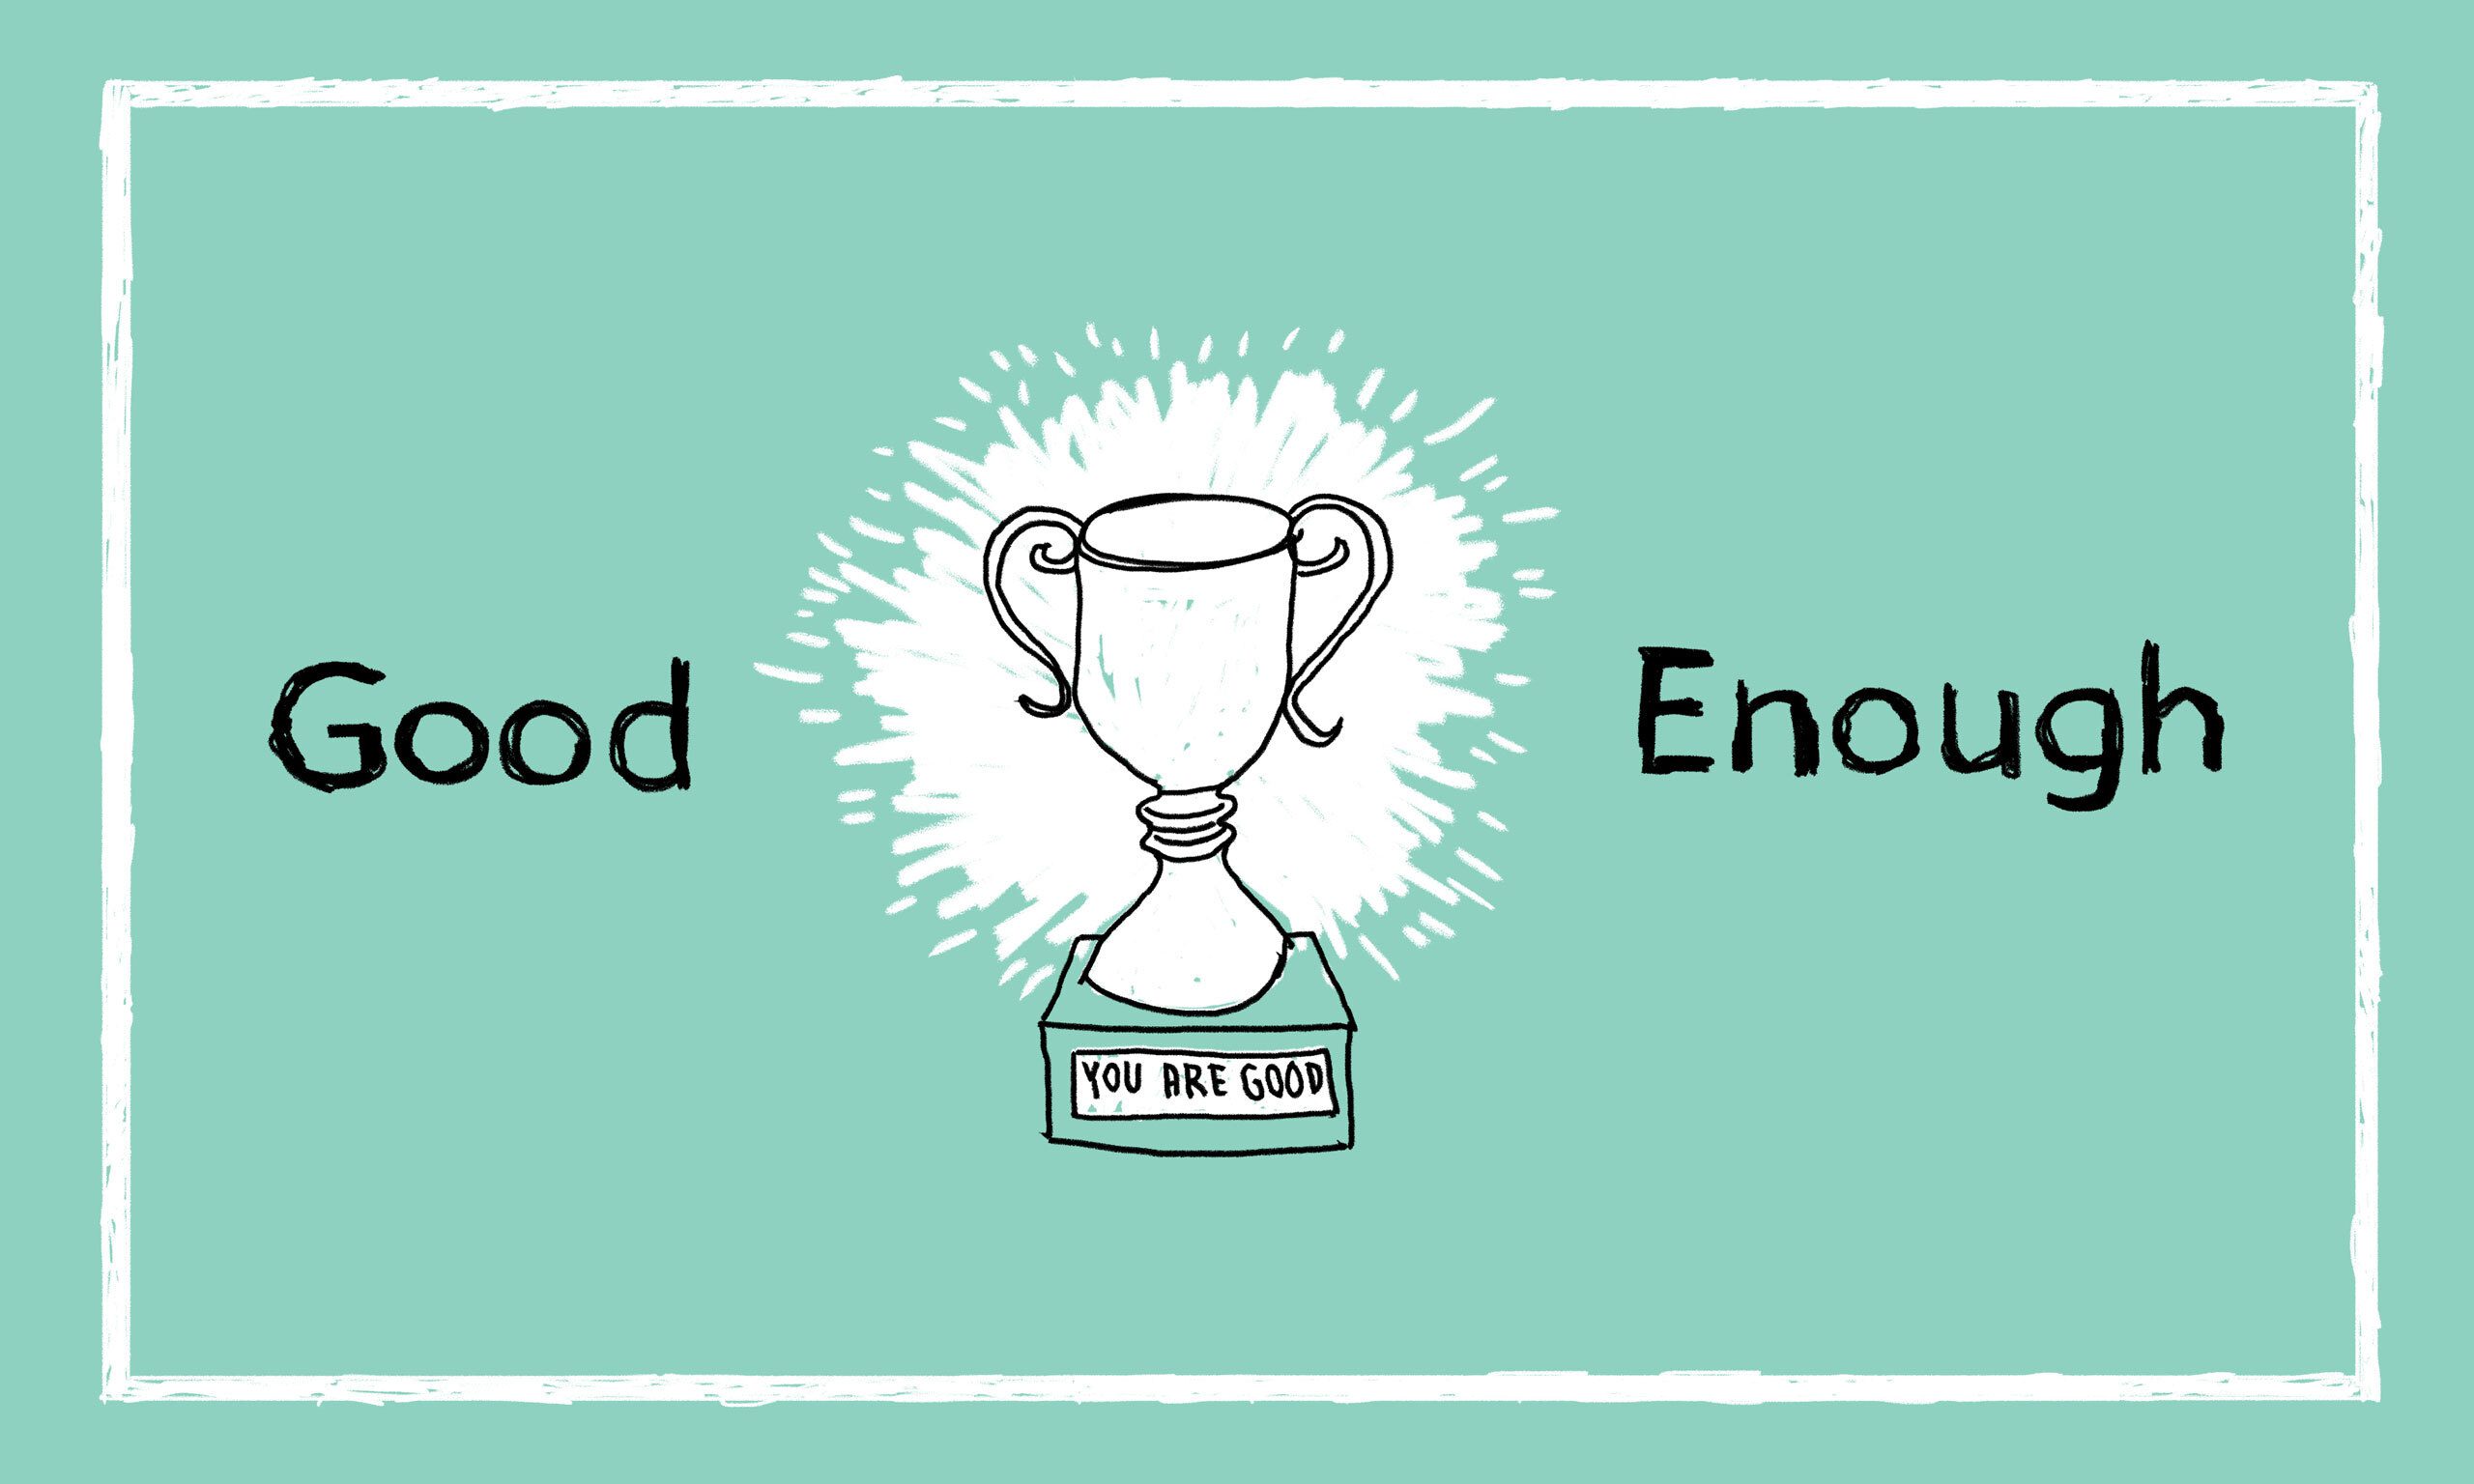 Title image for the article "Good Enough," featuring a trophy with the words "You Are Good."